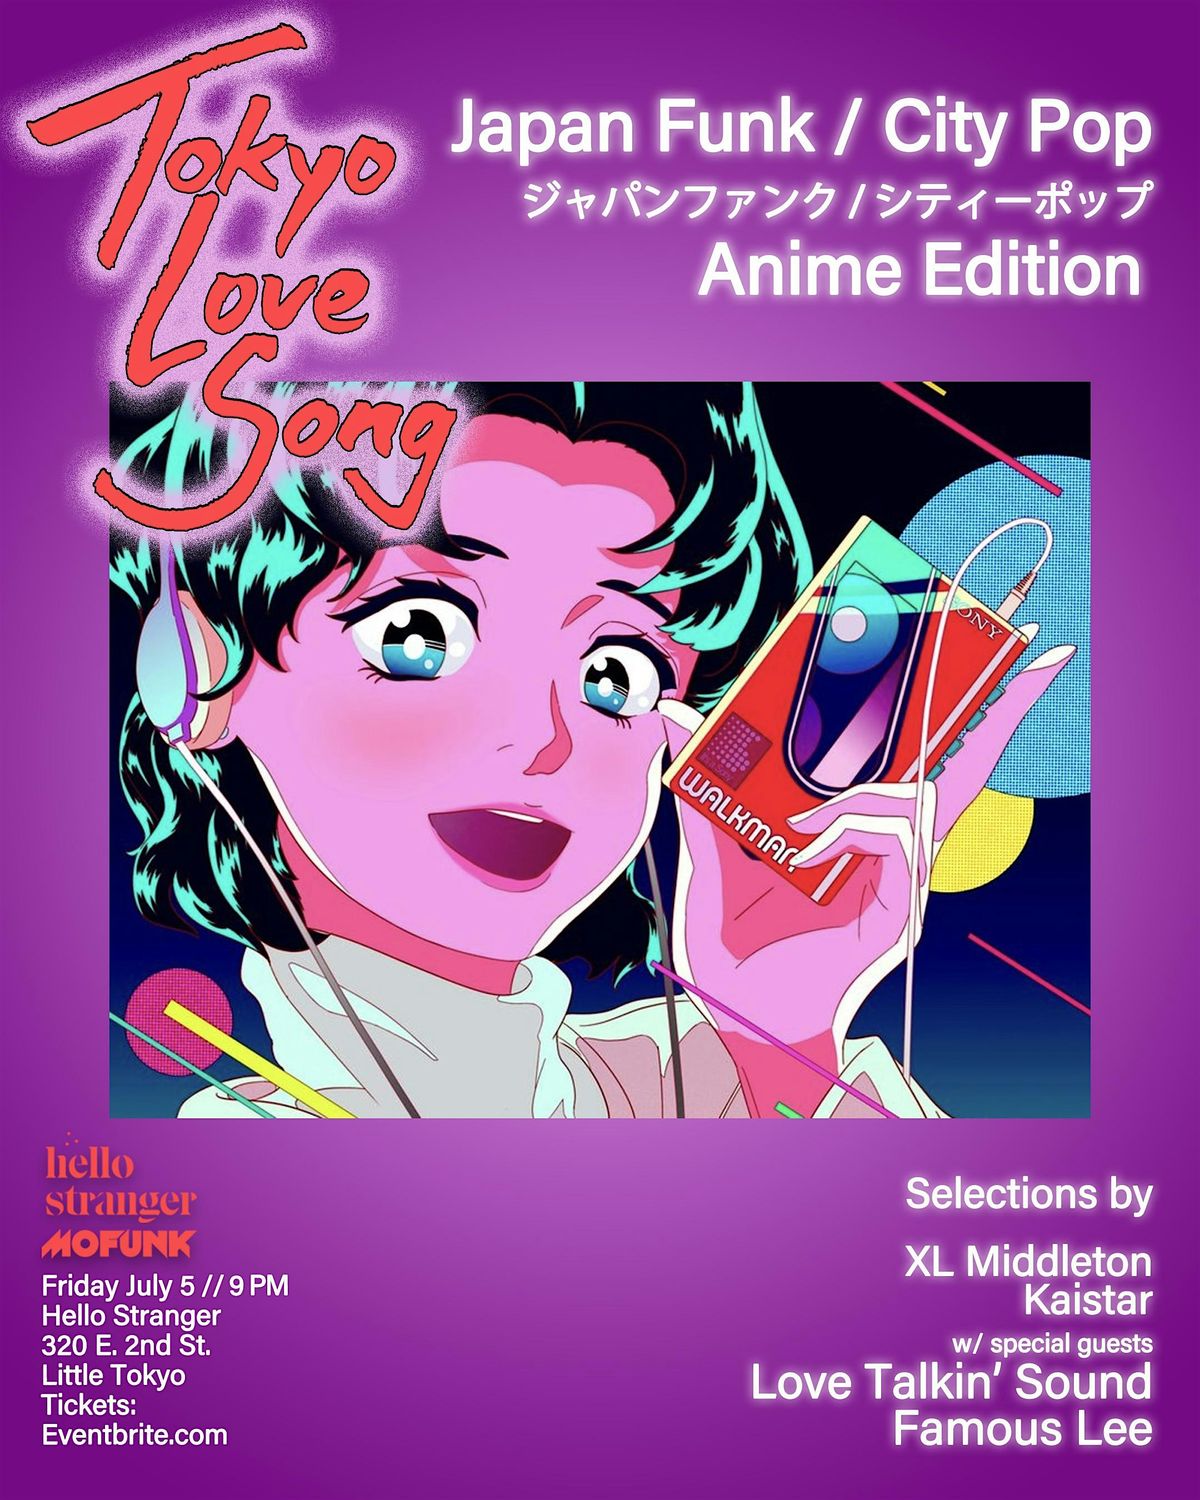 Tokyo Love Song - City Pop Night In Little Tokyo - Anime Edition!